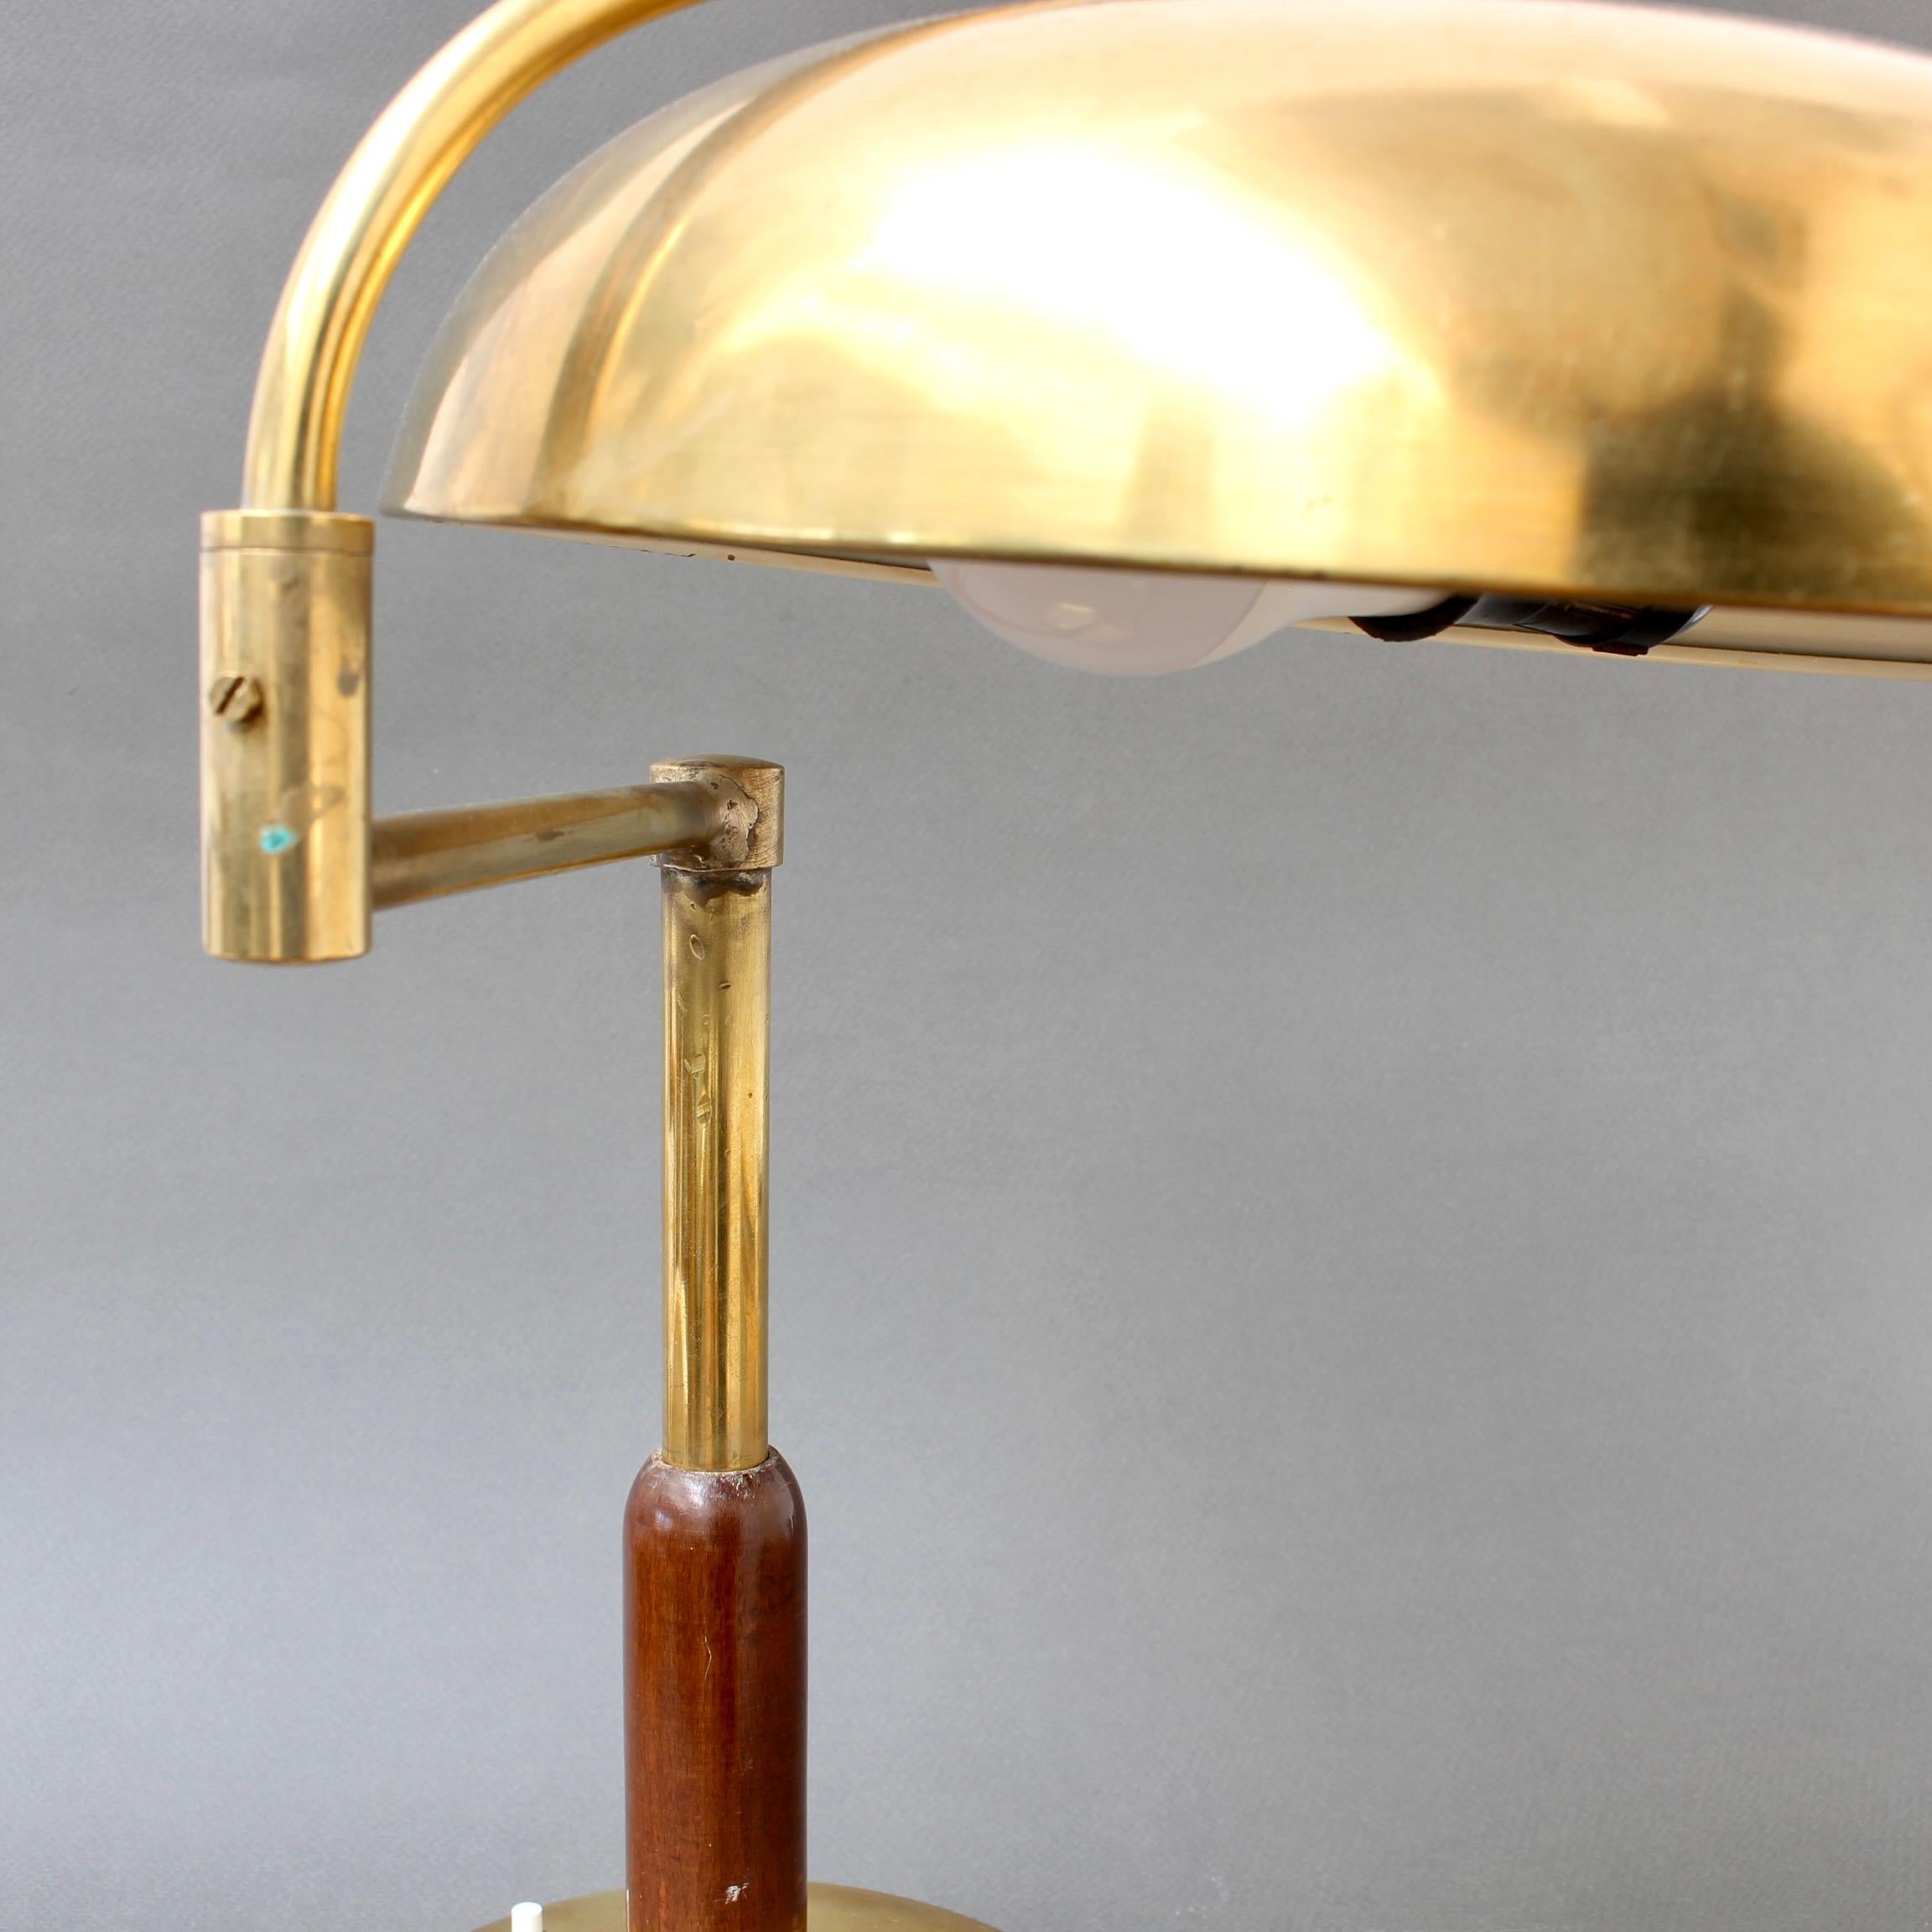 Italian Mid-Century Brass Table Lamp with Swivel Arm, circa 1950s For Sale 6